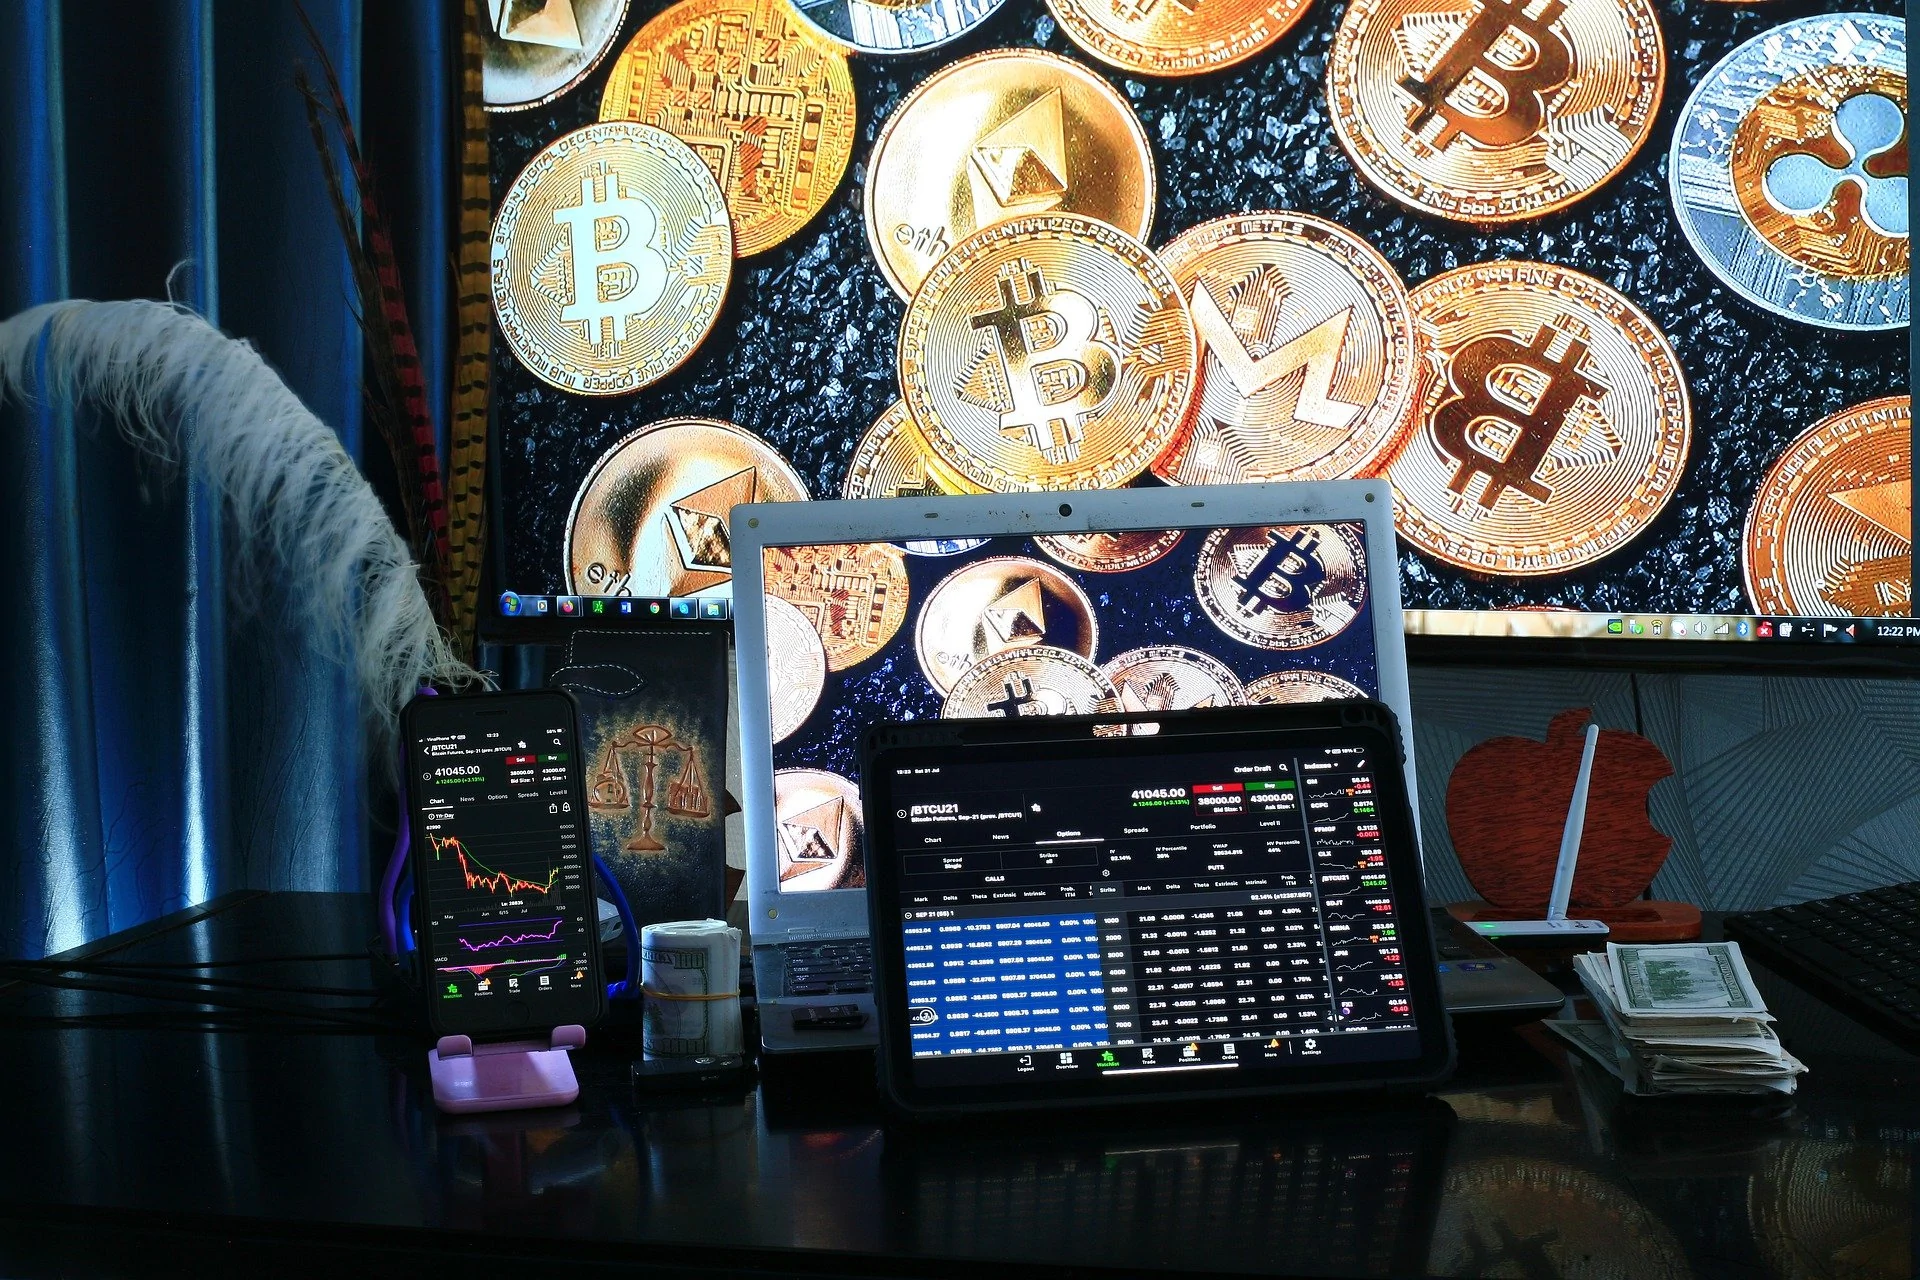 Cryptocurrency trading via laptop and smartphone